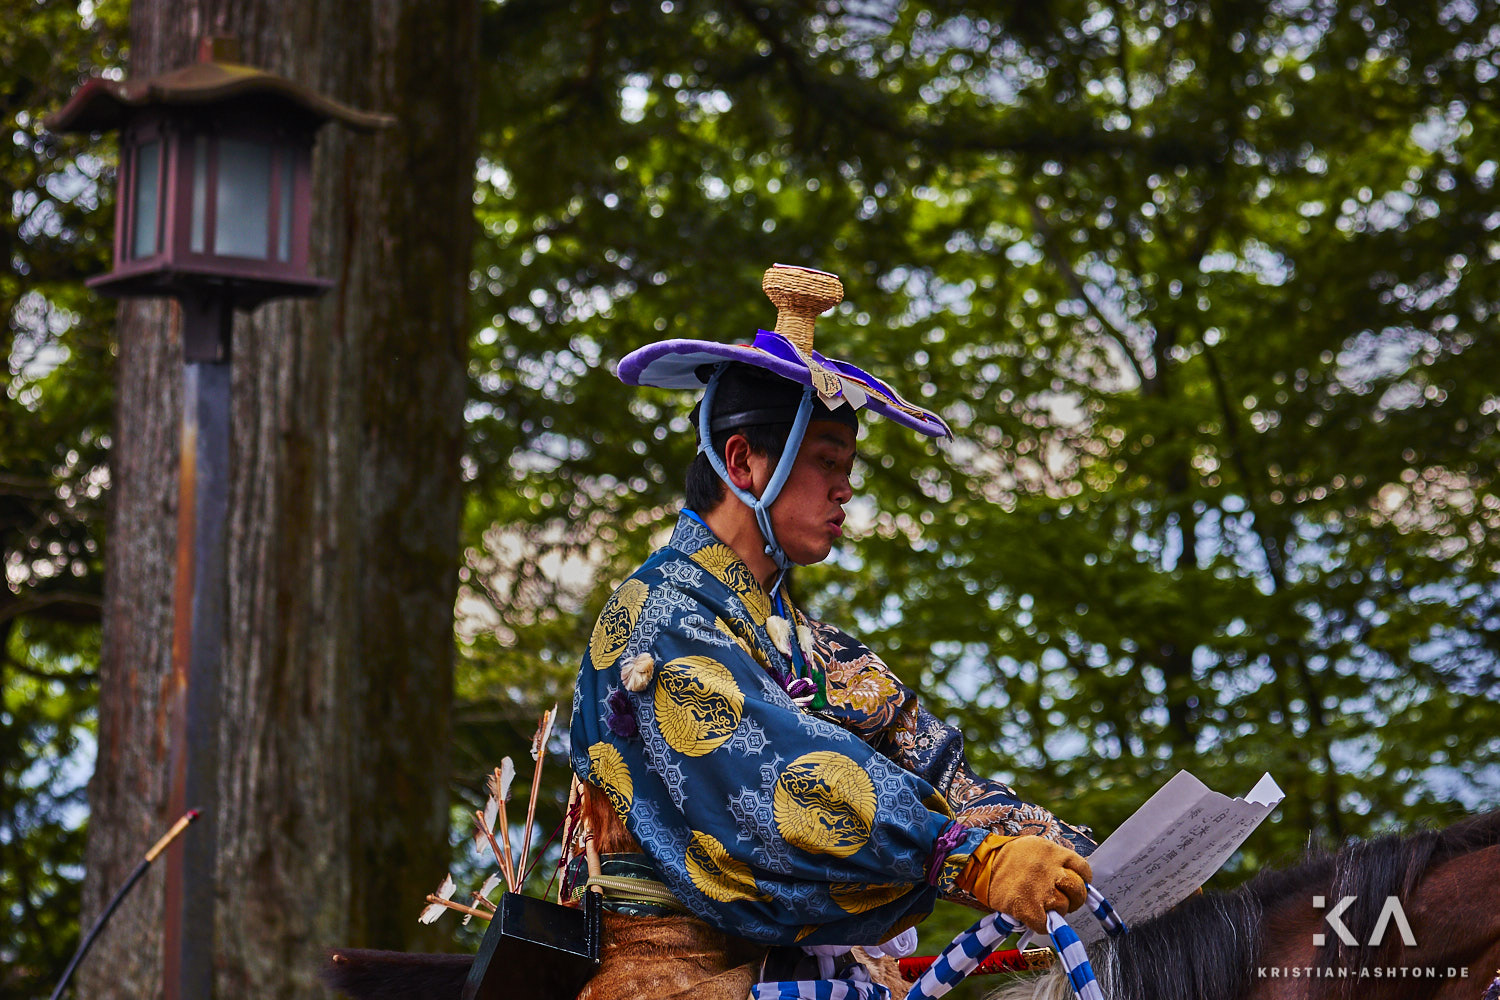 In front of the Toshogu shrine site - twice a year a competition is held here with archers on horseback!